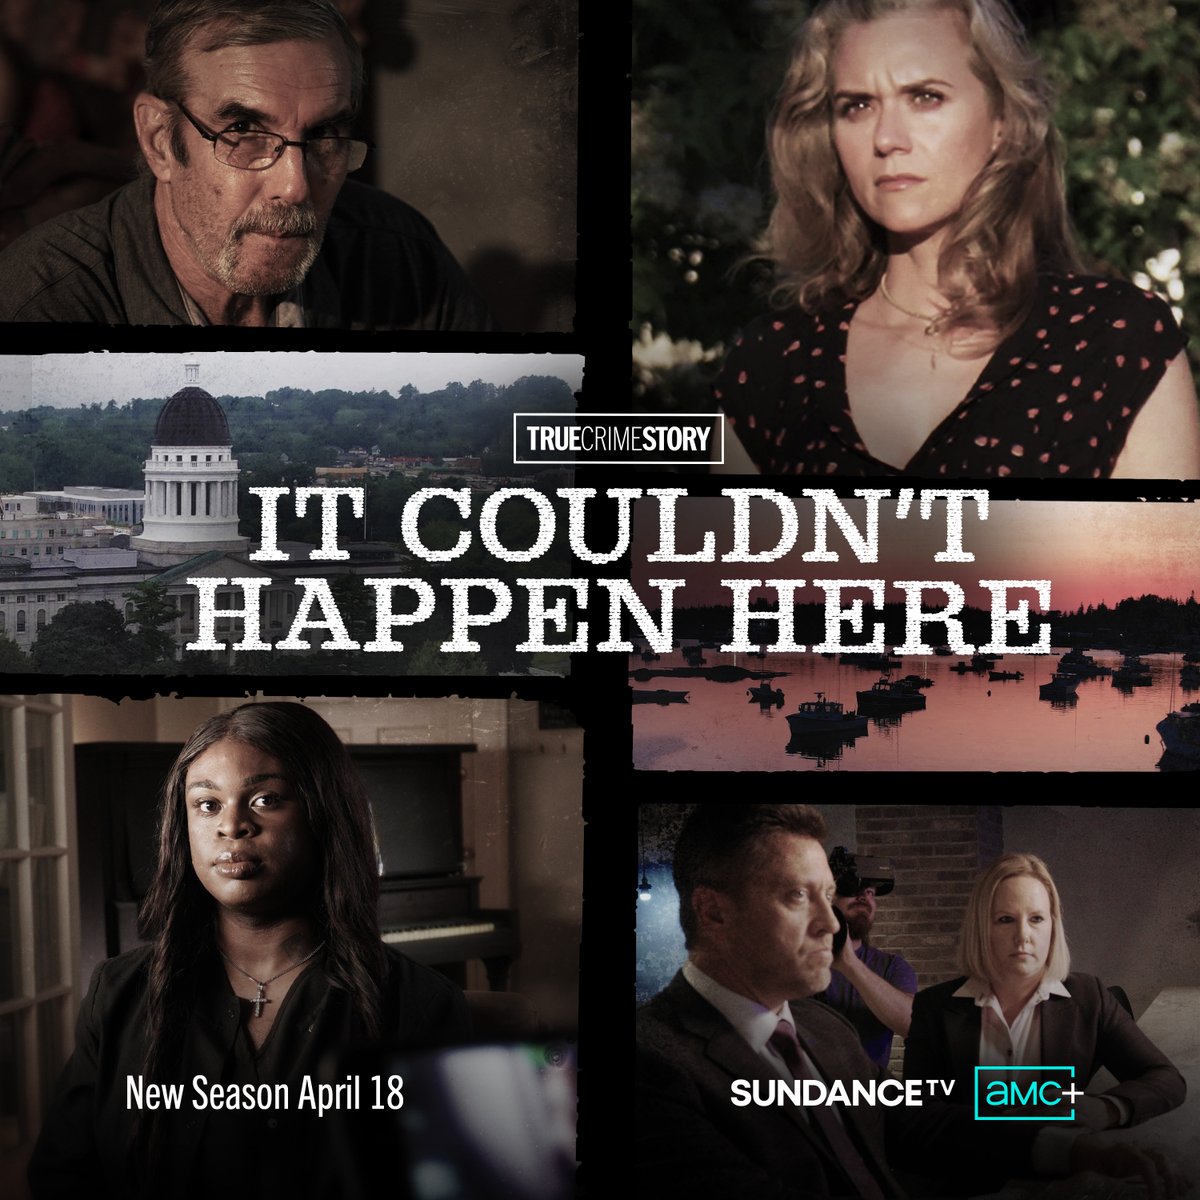 In 1992, a popular teen was found dead in her still-running car. Today, her family still seeks the truth of what happened. Join @HilarieBurton as she looks for an answer in the season premiere of #TrueCrimeStory: It Couldn't Happen Here, tonight at 10pm on @SundanceTV & AMC+.